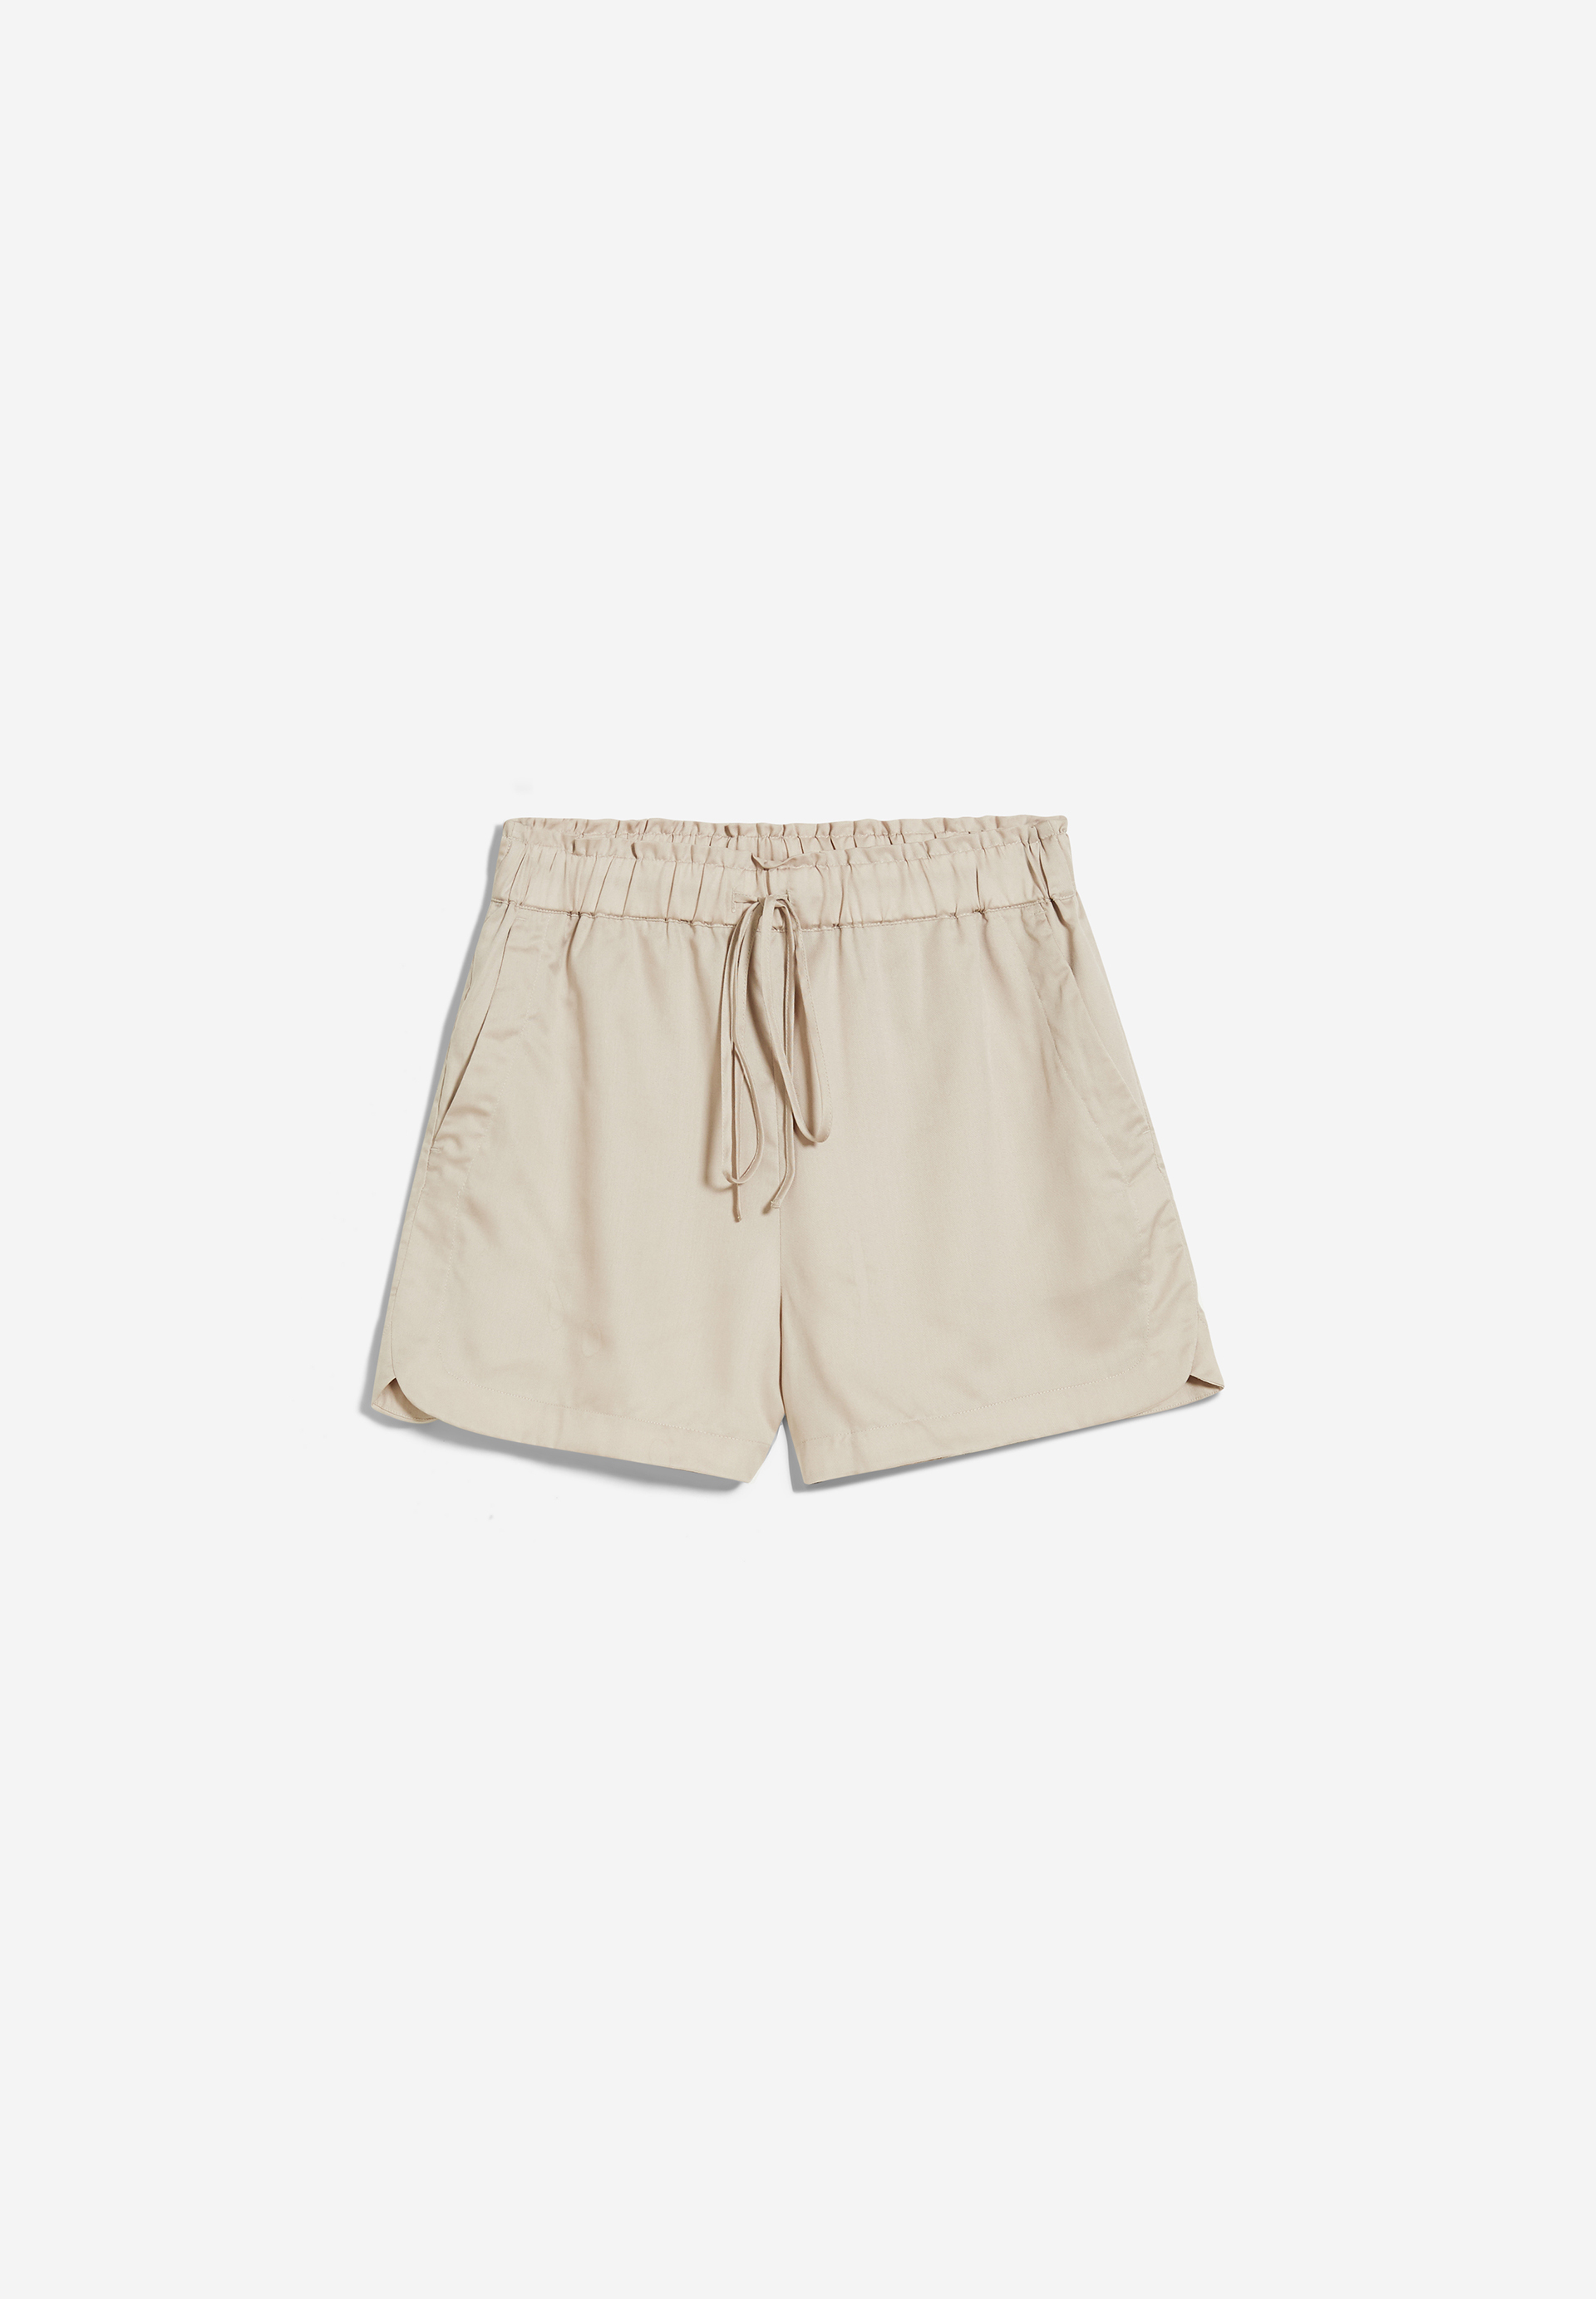 VAANNA Shorts Relaxed Fit made of TENCEL™ Lyocell